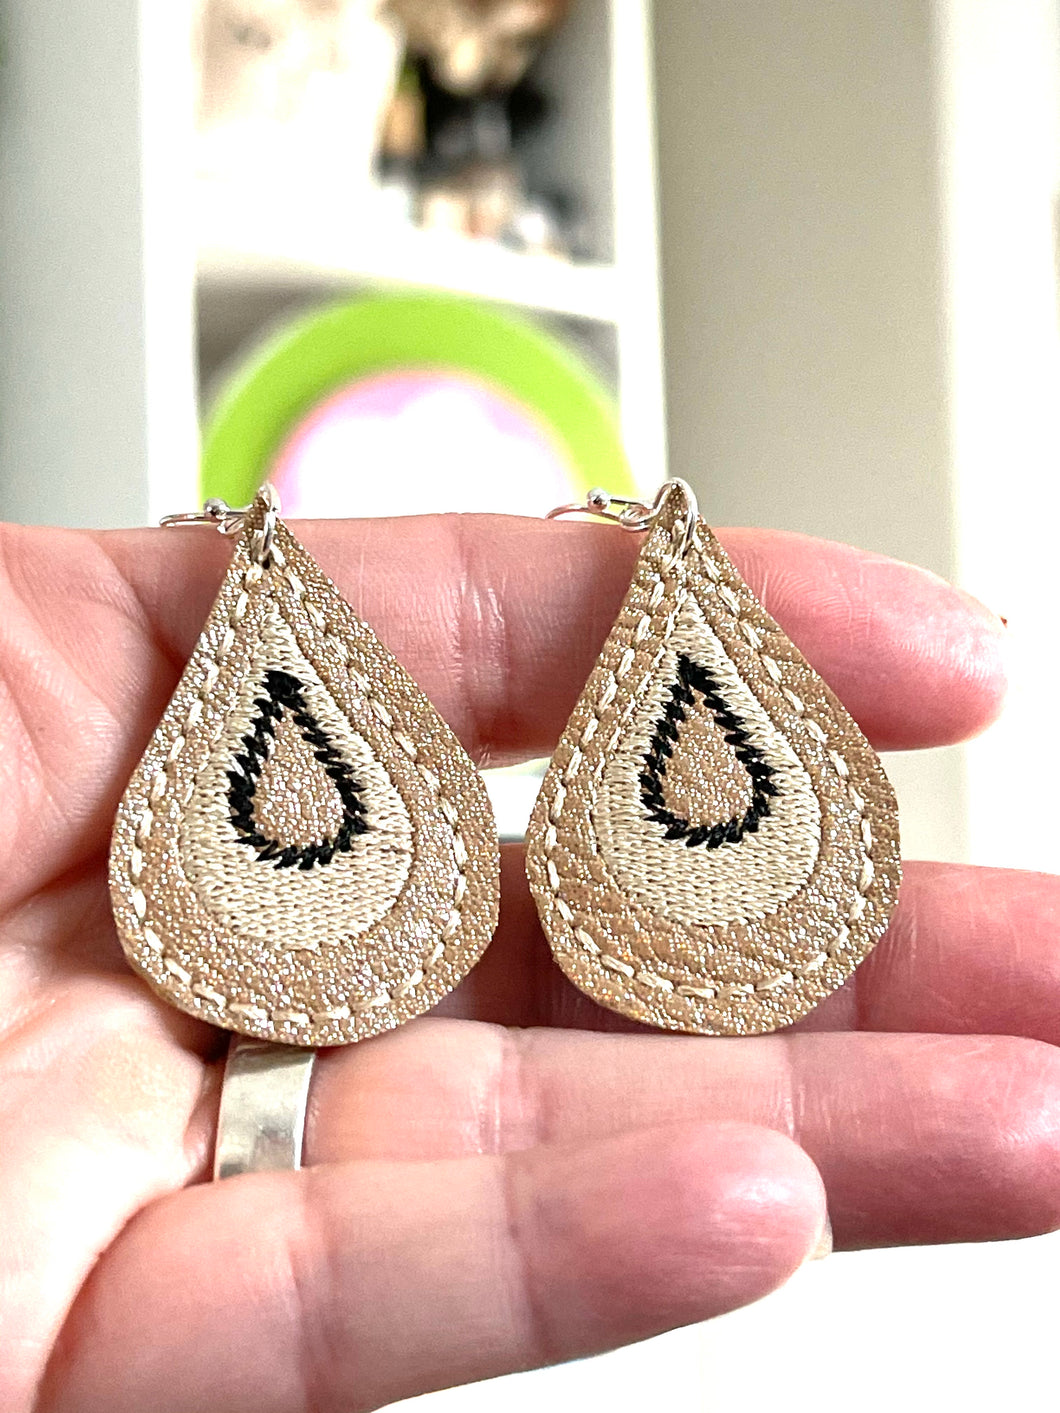 Drama Drops Earrings embroidery design for Vinyl and Leather - TWO sizes